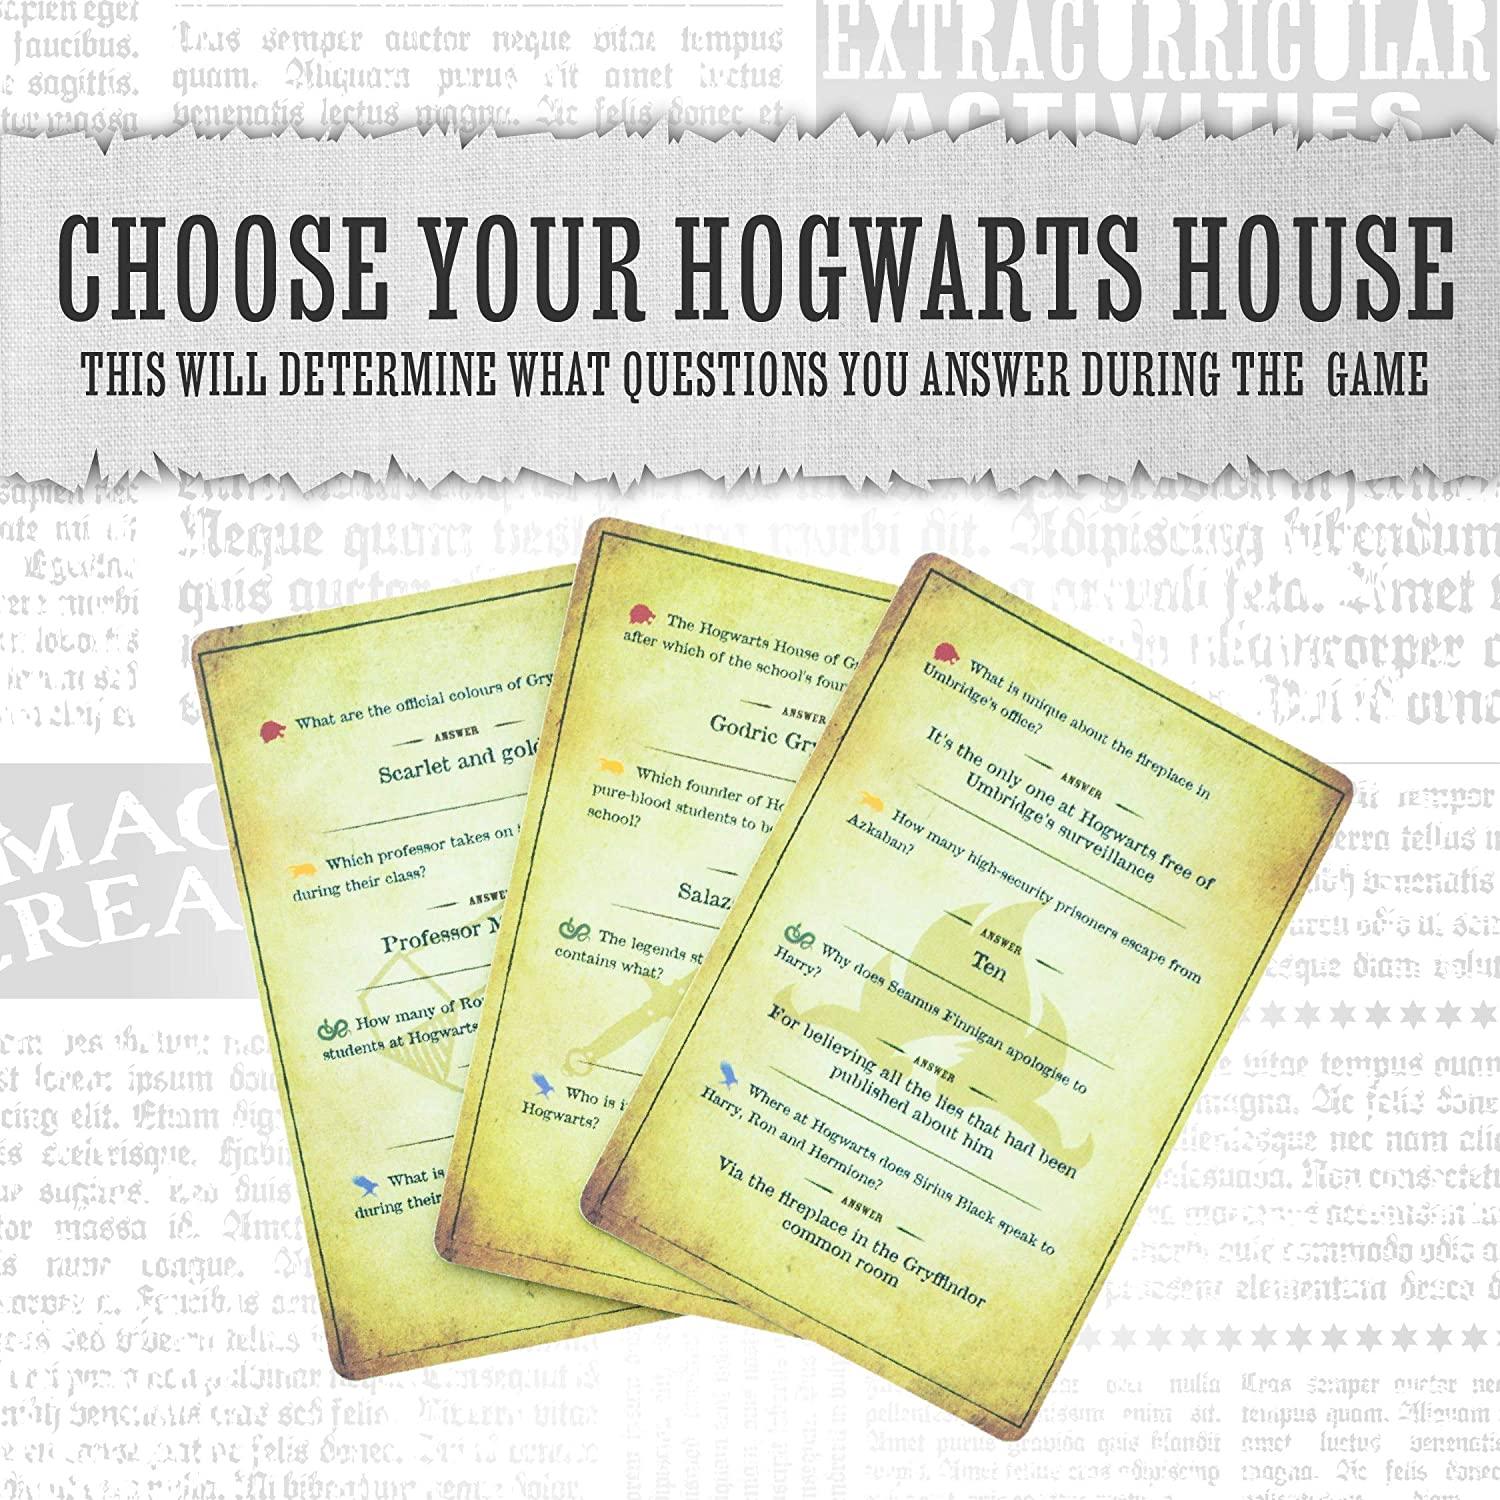 Harry Potter: The Ultimate Movie Quiz (1600+ Questions) - GameStore.mt | Powered by Flutisat